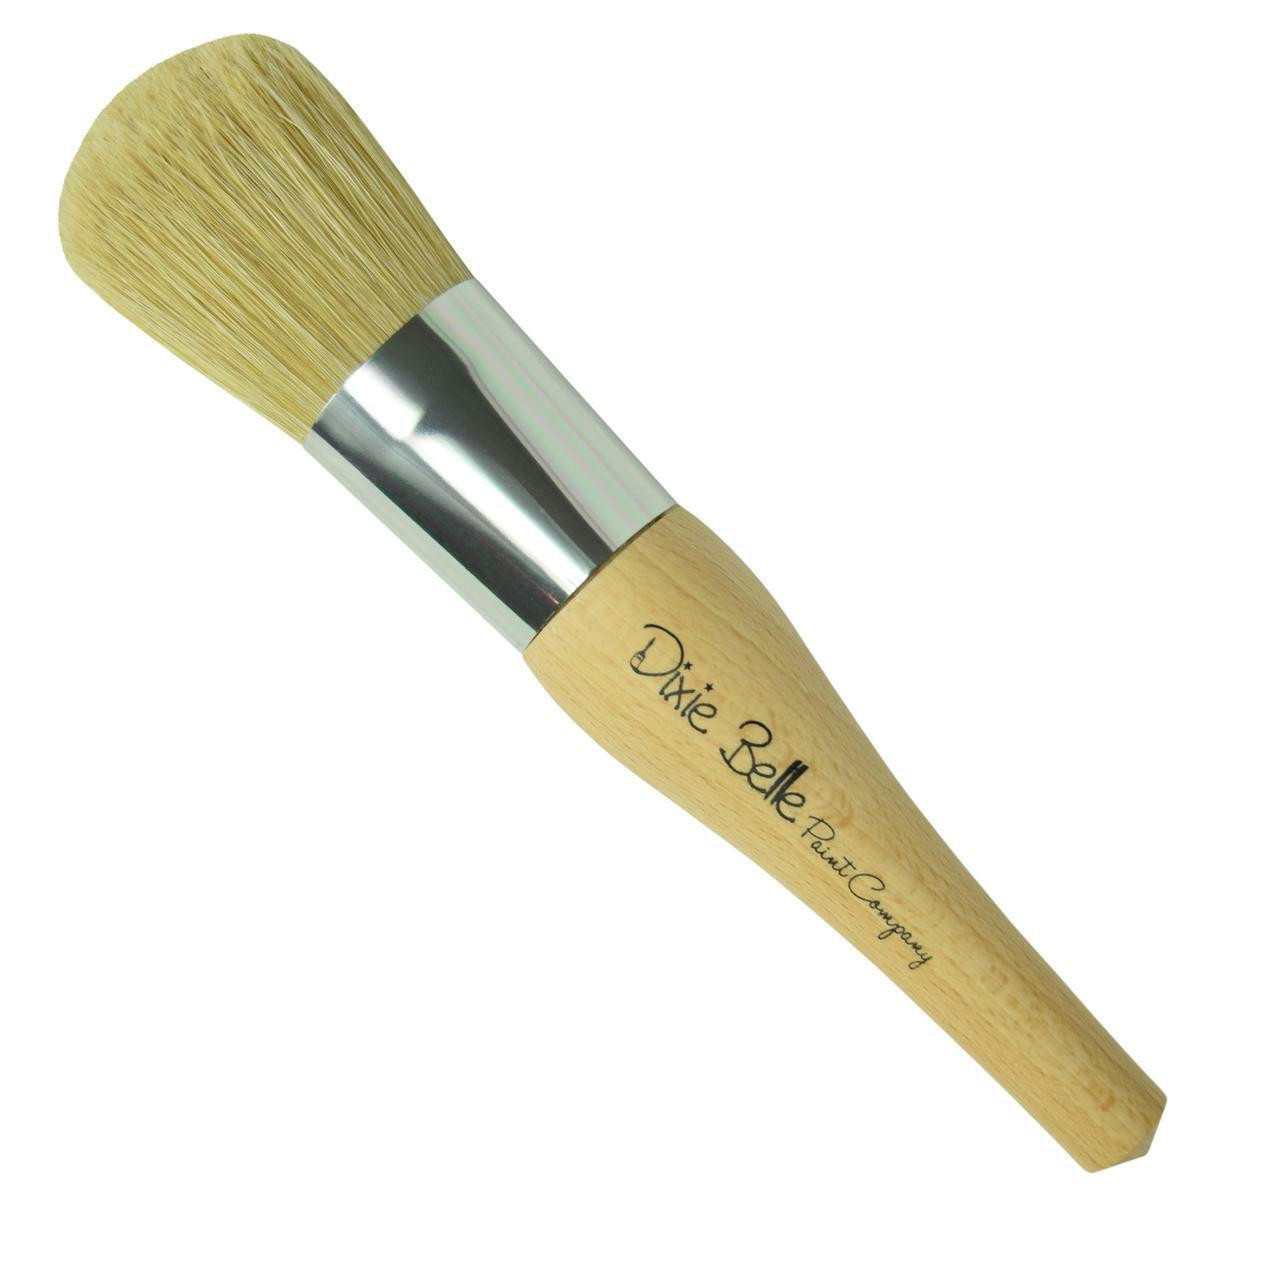 The Best Chalk Paint Brushes for Furniture Painting - Bellewood Cottage